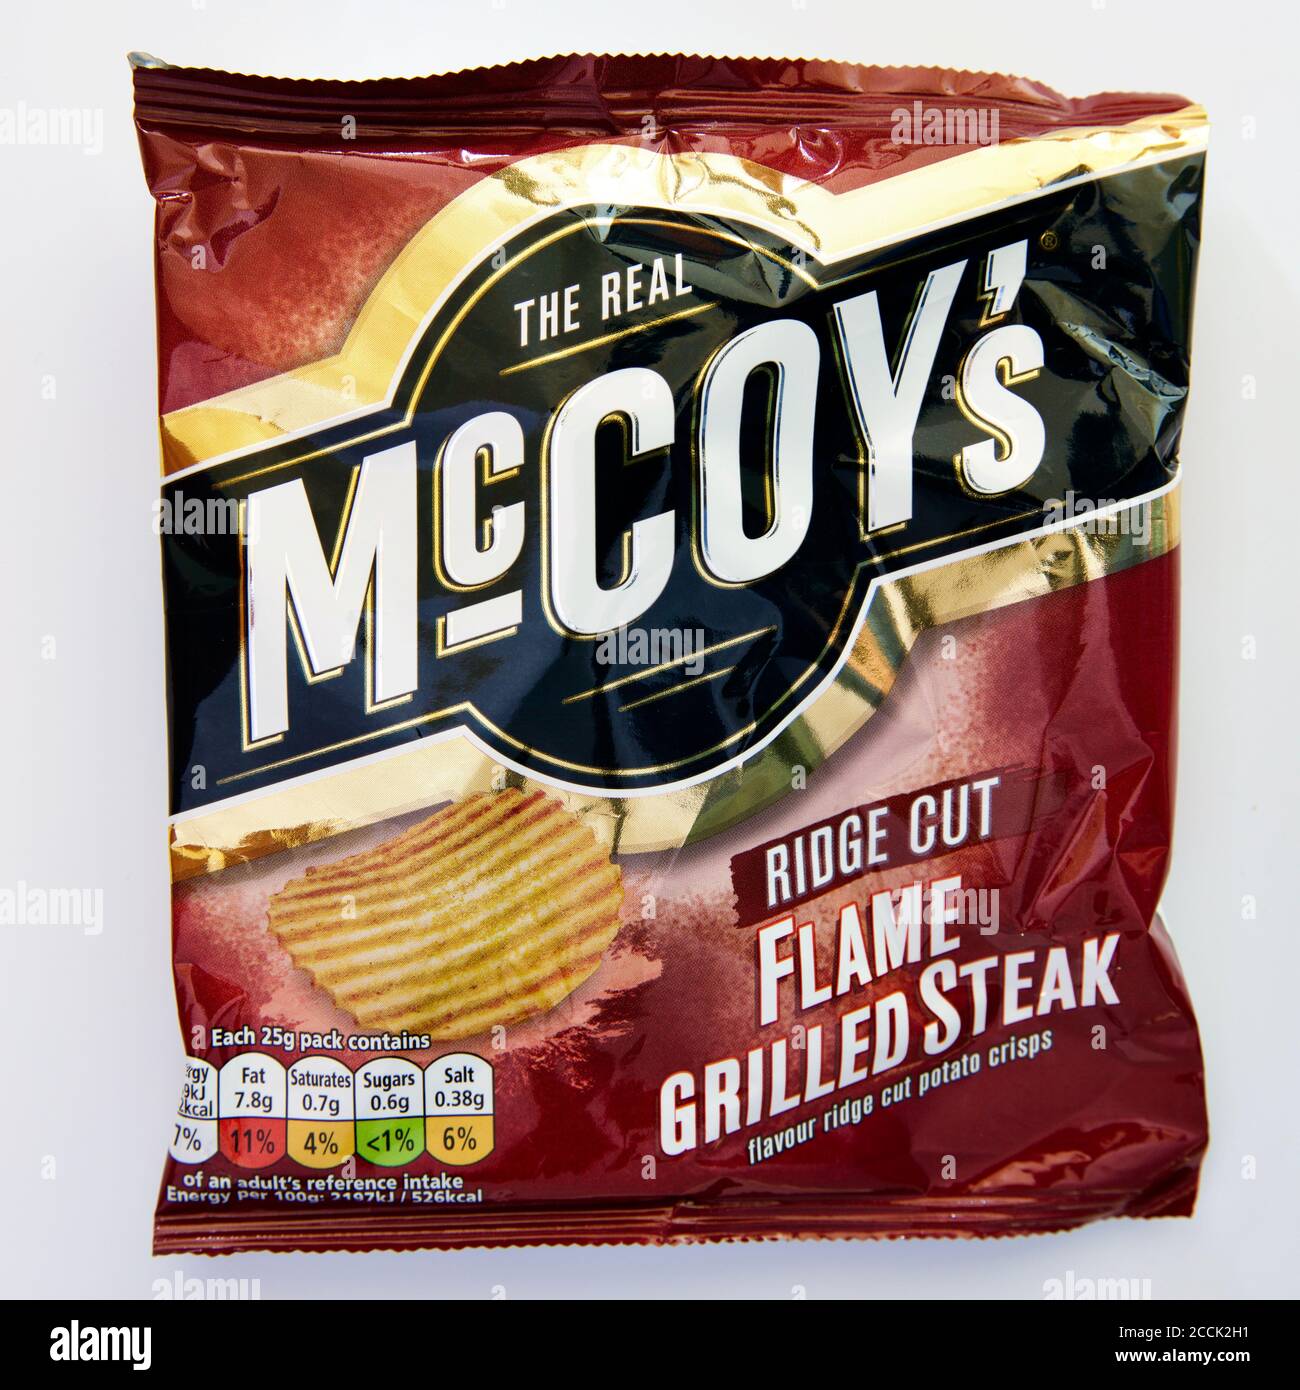 Packet of McCoy's Flame Grilled Steak Crisps Stock Photo - Alamy